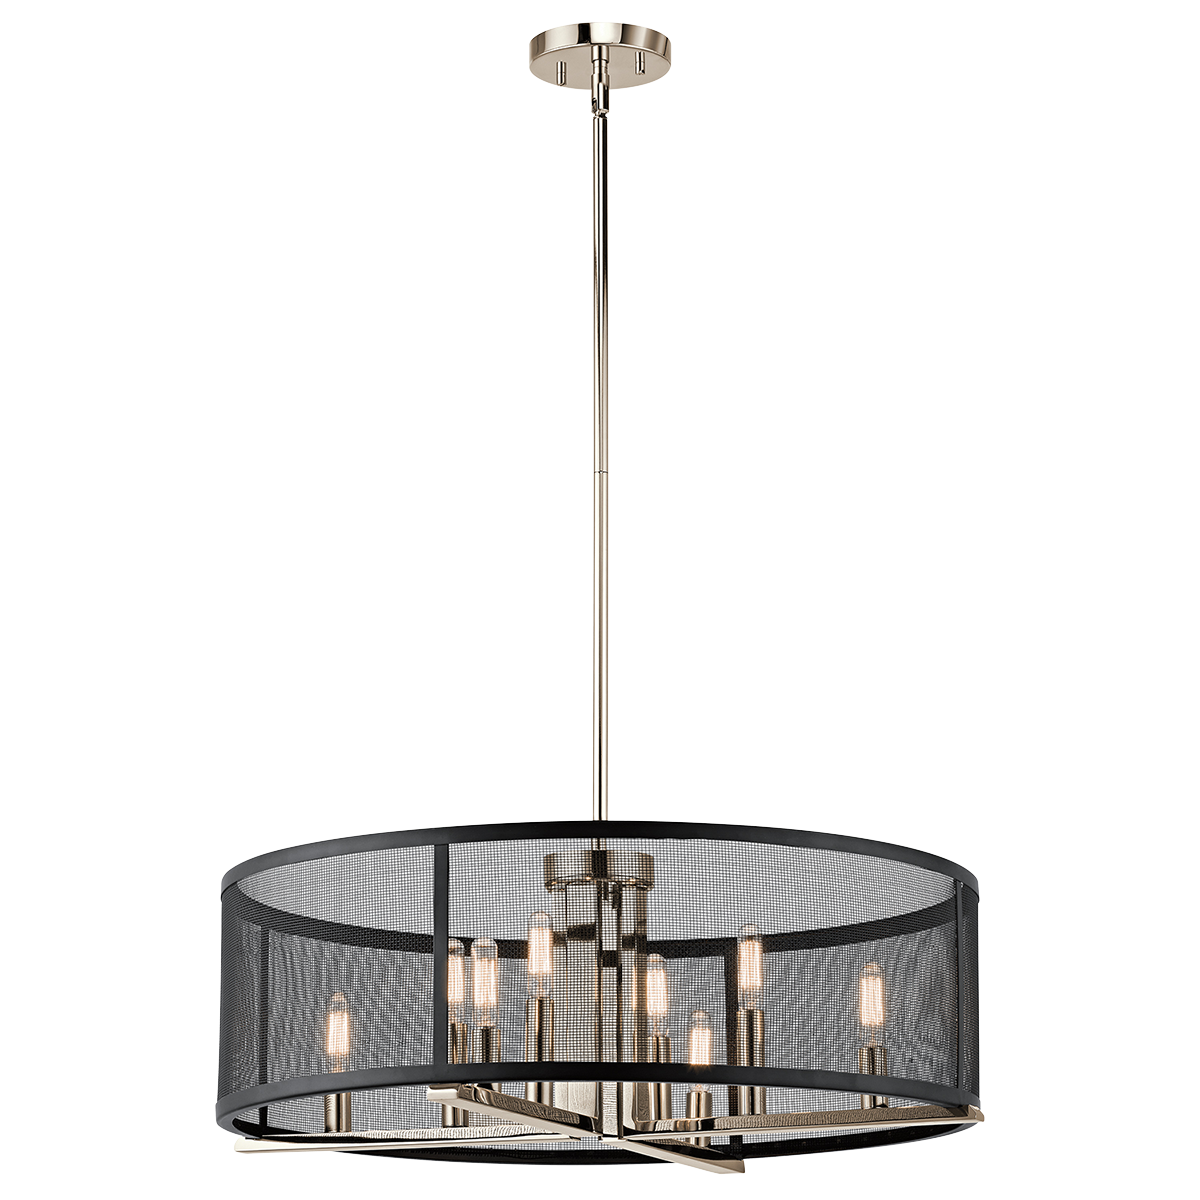 Titus 8 Light Chandelier/Pendant features black mesh ironwork, giving off an industrial accent to a modernly sleek collection. The Chandelier/Pendant has a Polished Nickel finish for a dynamic effect.